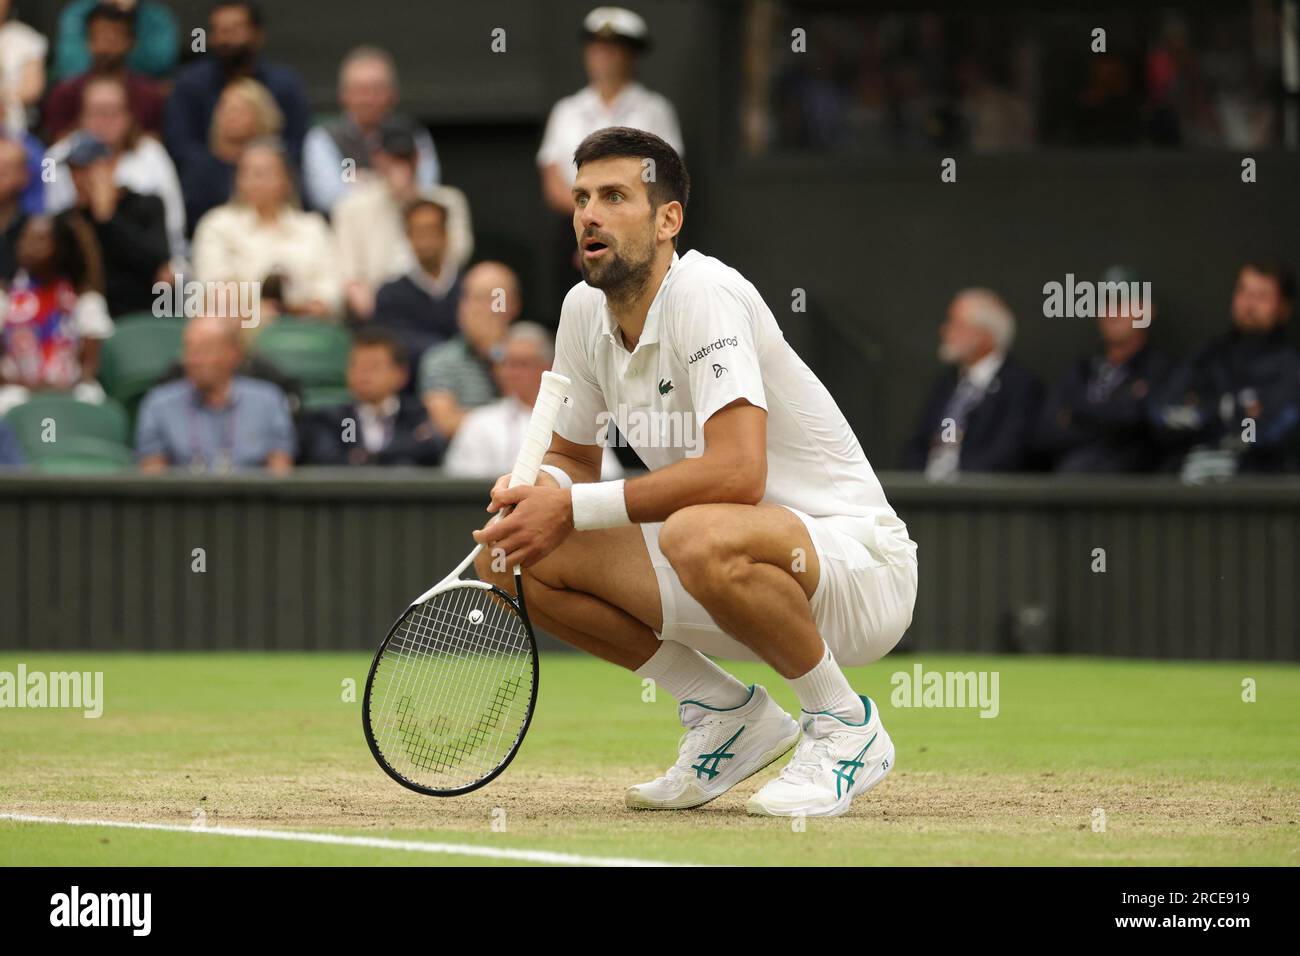 Novak Djokovic of Serbia reacts after losing a point for hinderance during the Gentlemens Singles Semi-finals match against Jannik Sinner of Italy in the Championships, Wimbledon at All England Lawn Tennis and